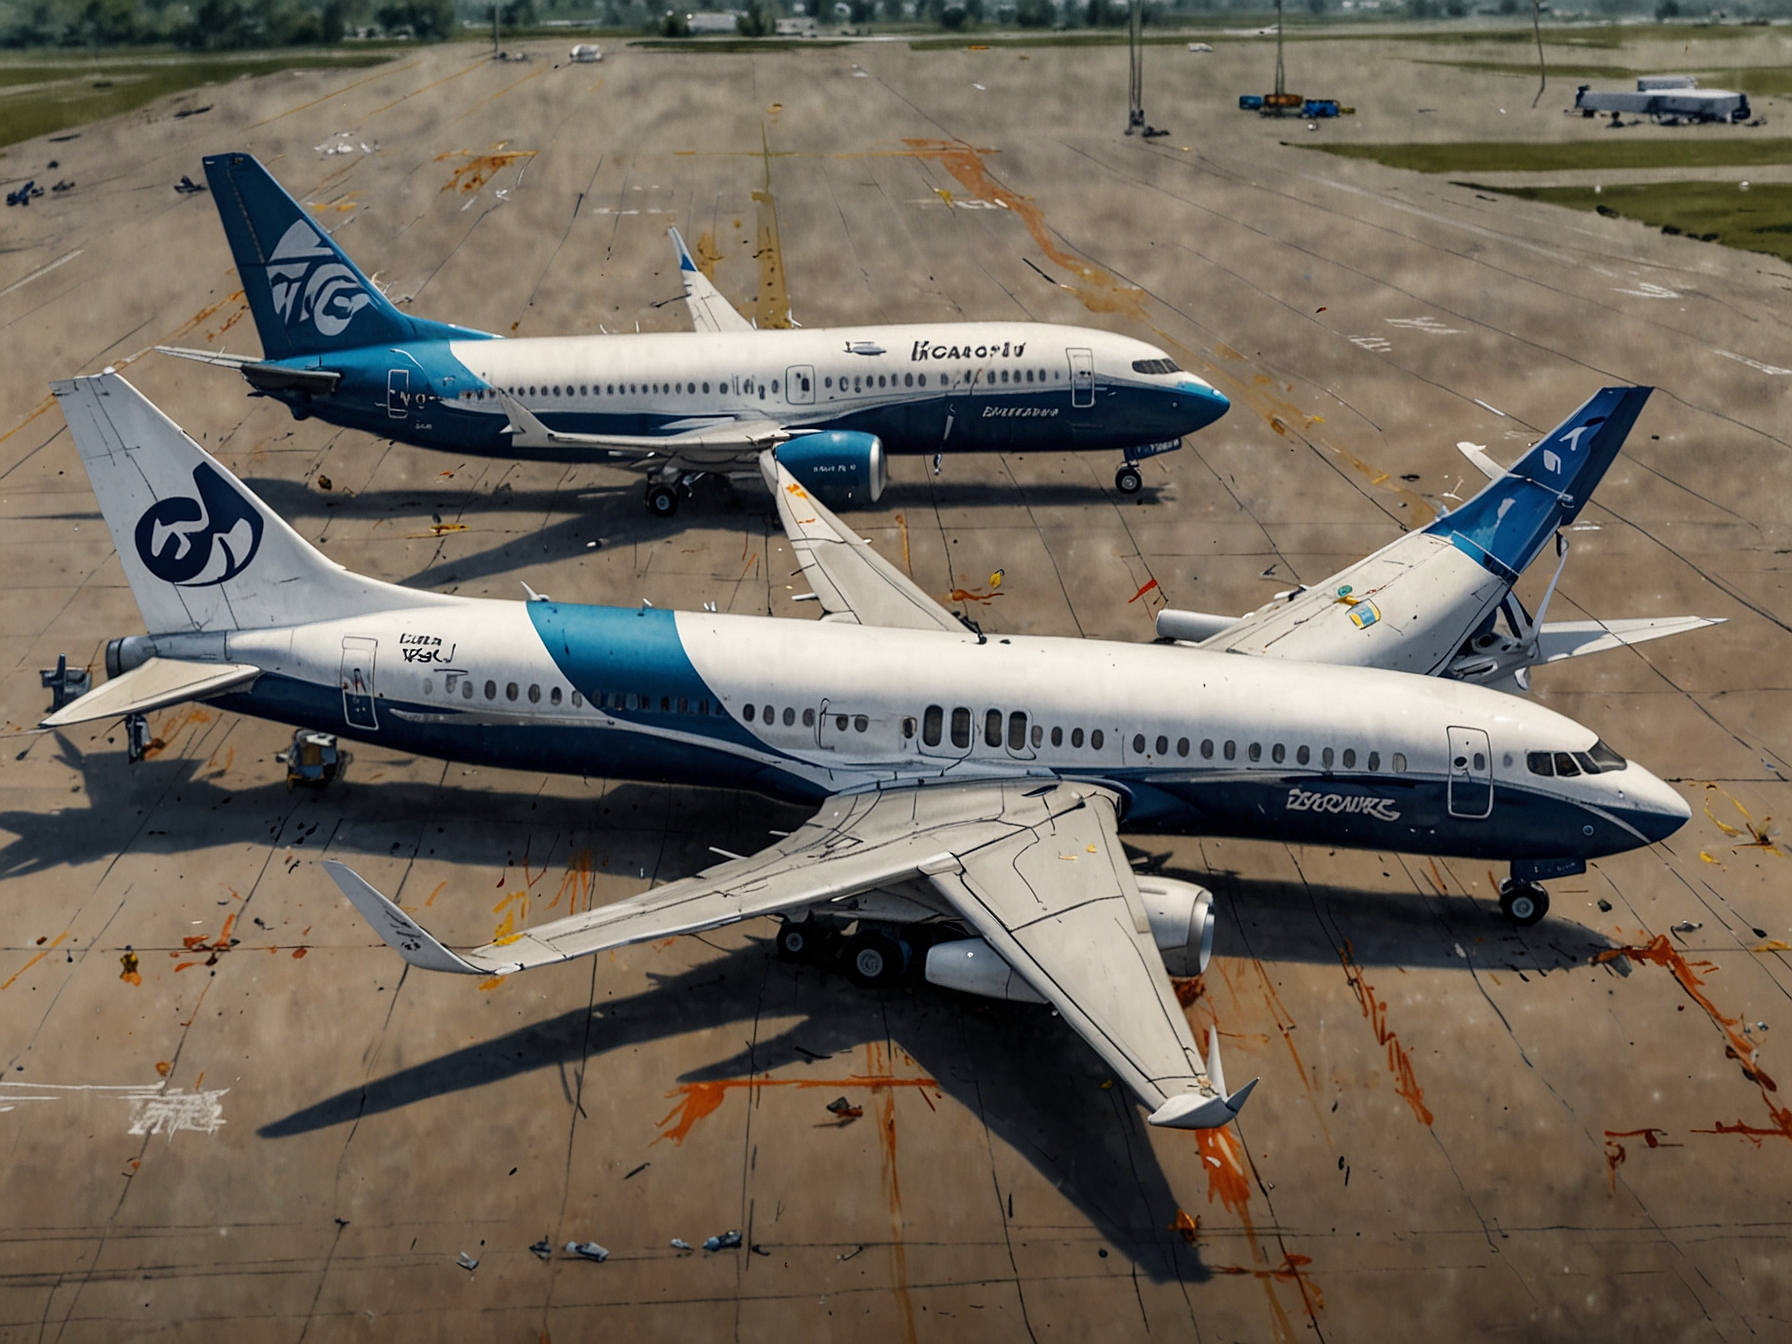 An image depicting the grounded Boeing 737 Max fleet, highlighting the global grounding order and regulatory scrutiny the aircraft faced following the fatal crashes.